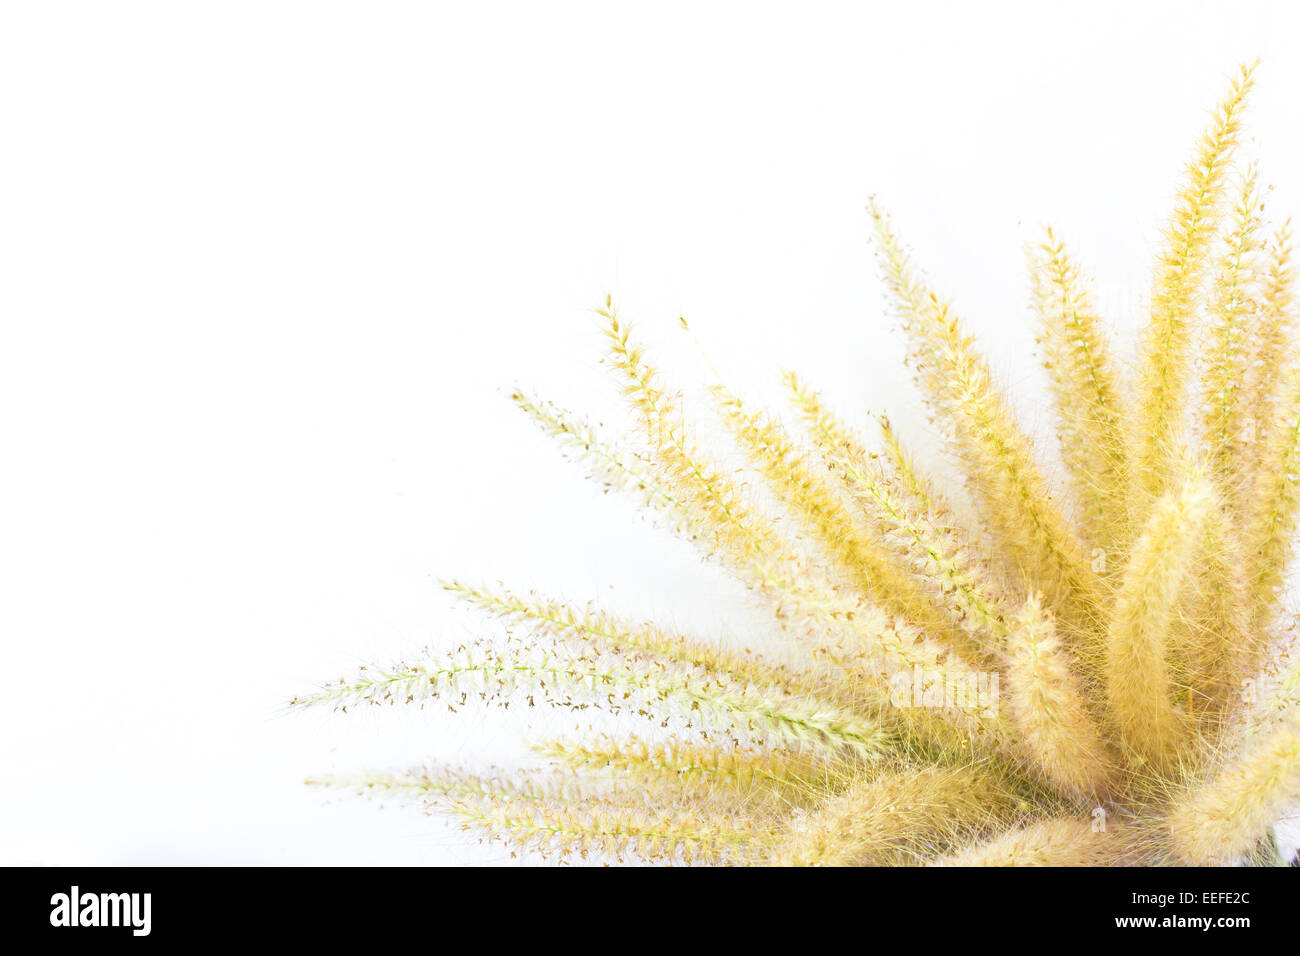 The Liliopsida, Poaceae, Weed Flowers on plain background Stock Photo